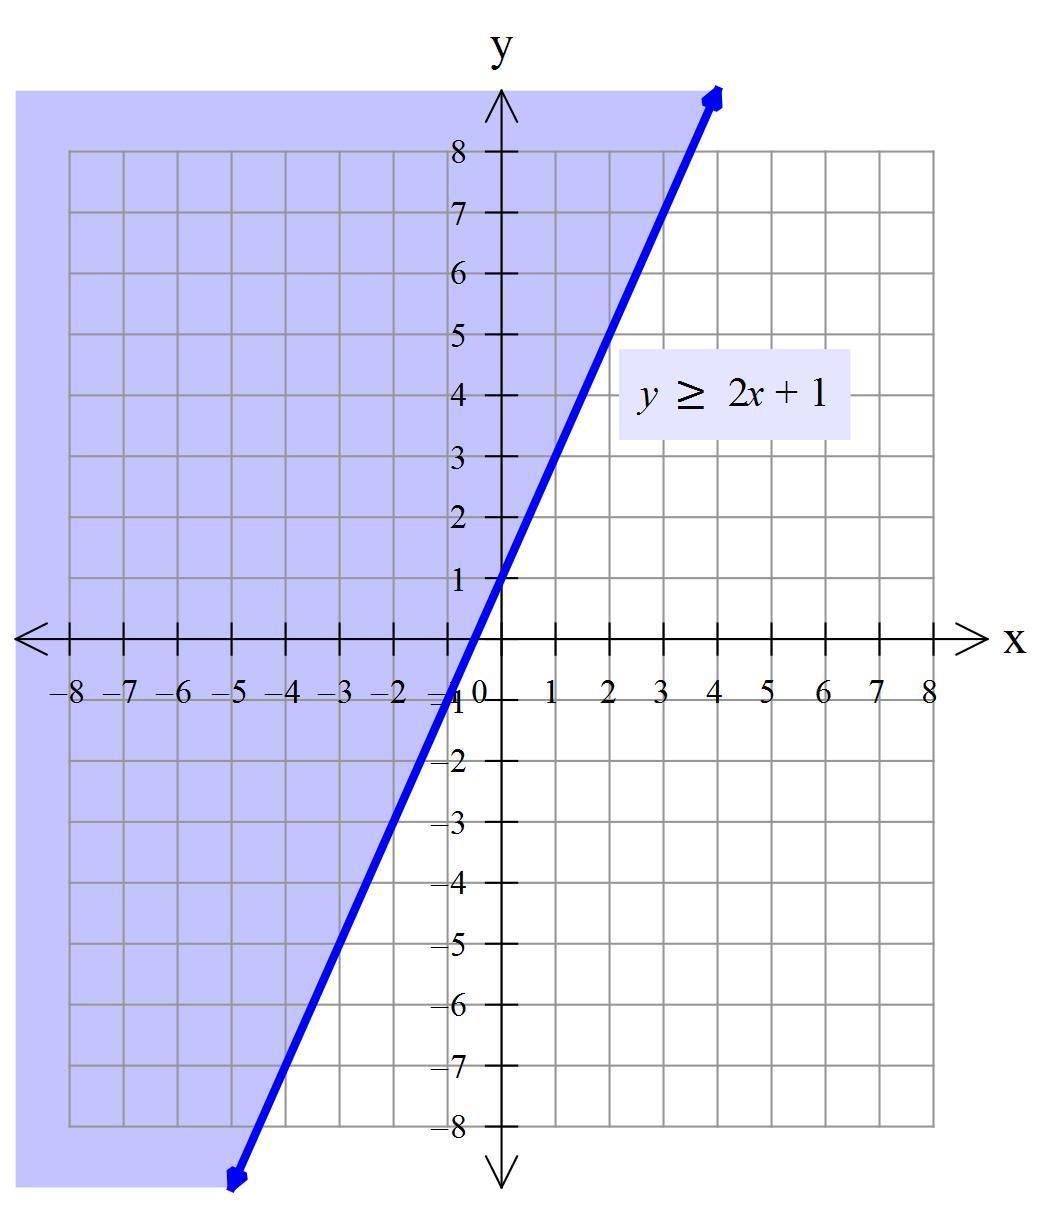 Part II: Graph The Following Inequalities On The Coordinate Grid Provided. 5. Y &gt; 2x + 1 4. Y 